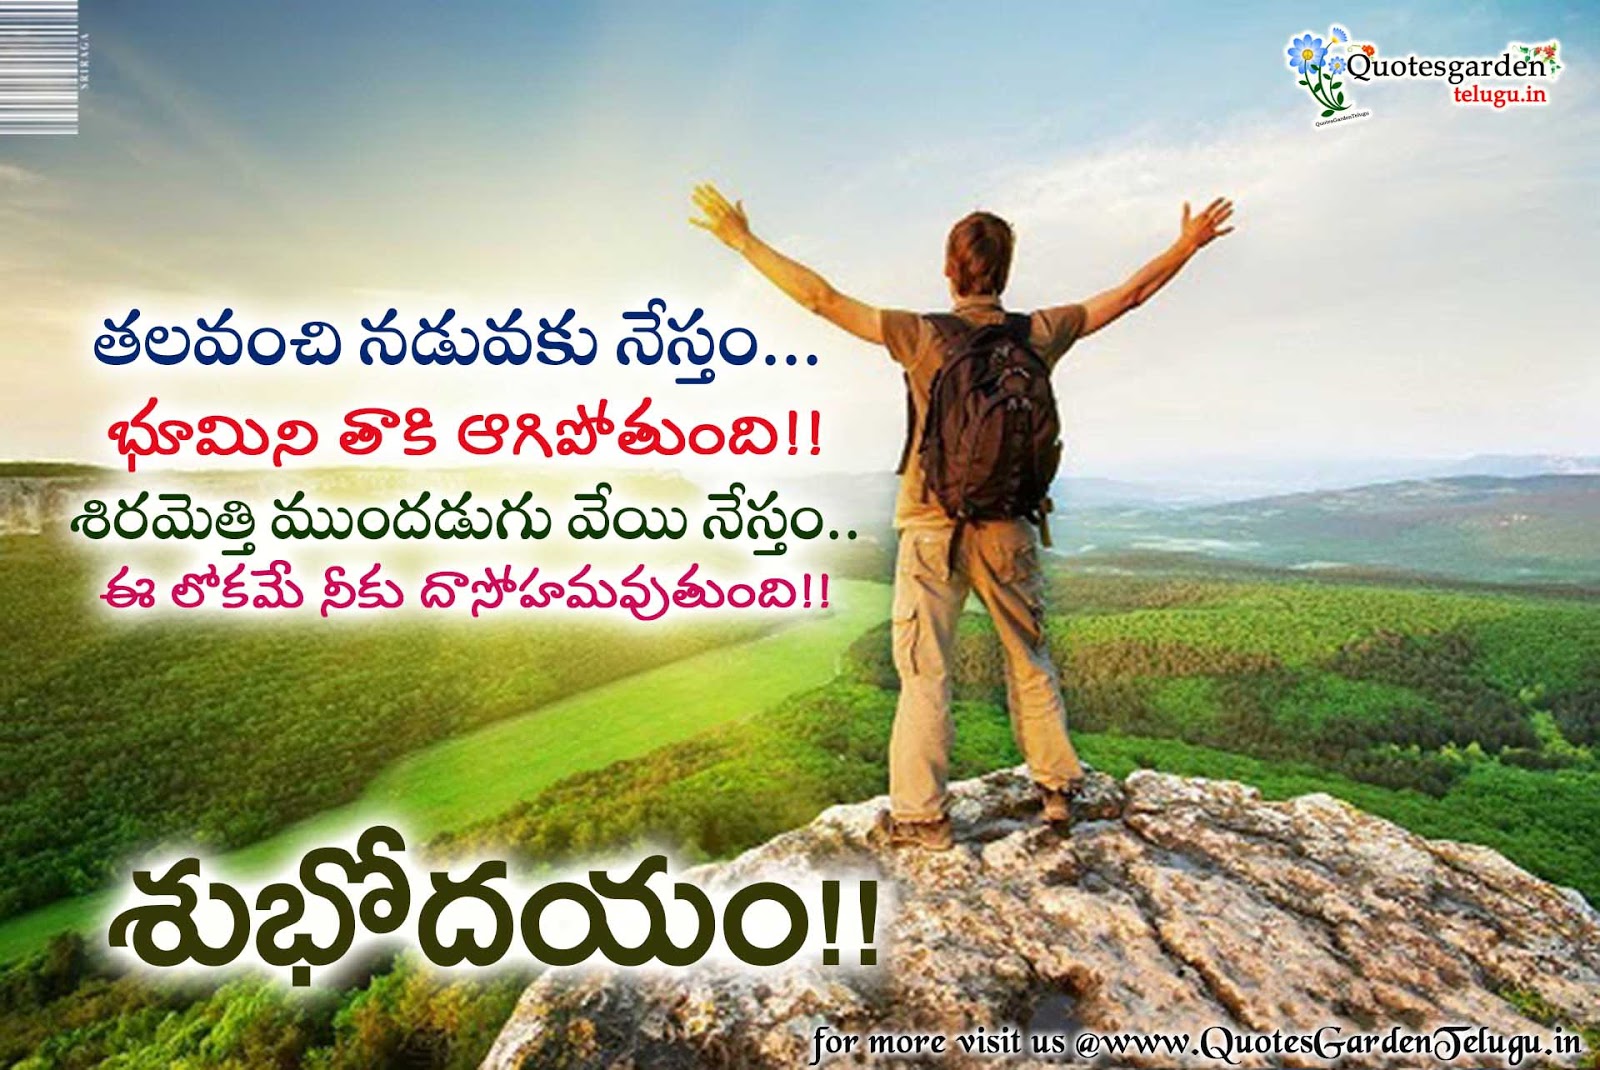 Good morning Quotes telugu images hd wallpapers | QUOTES GARDEN ...